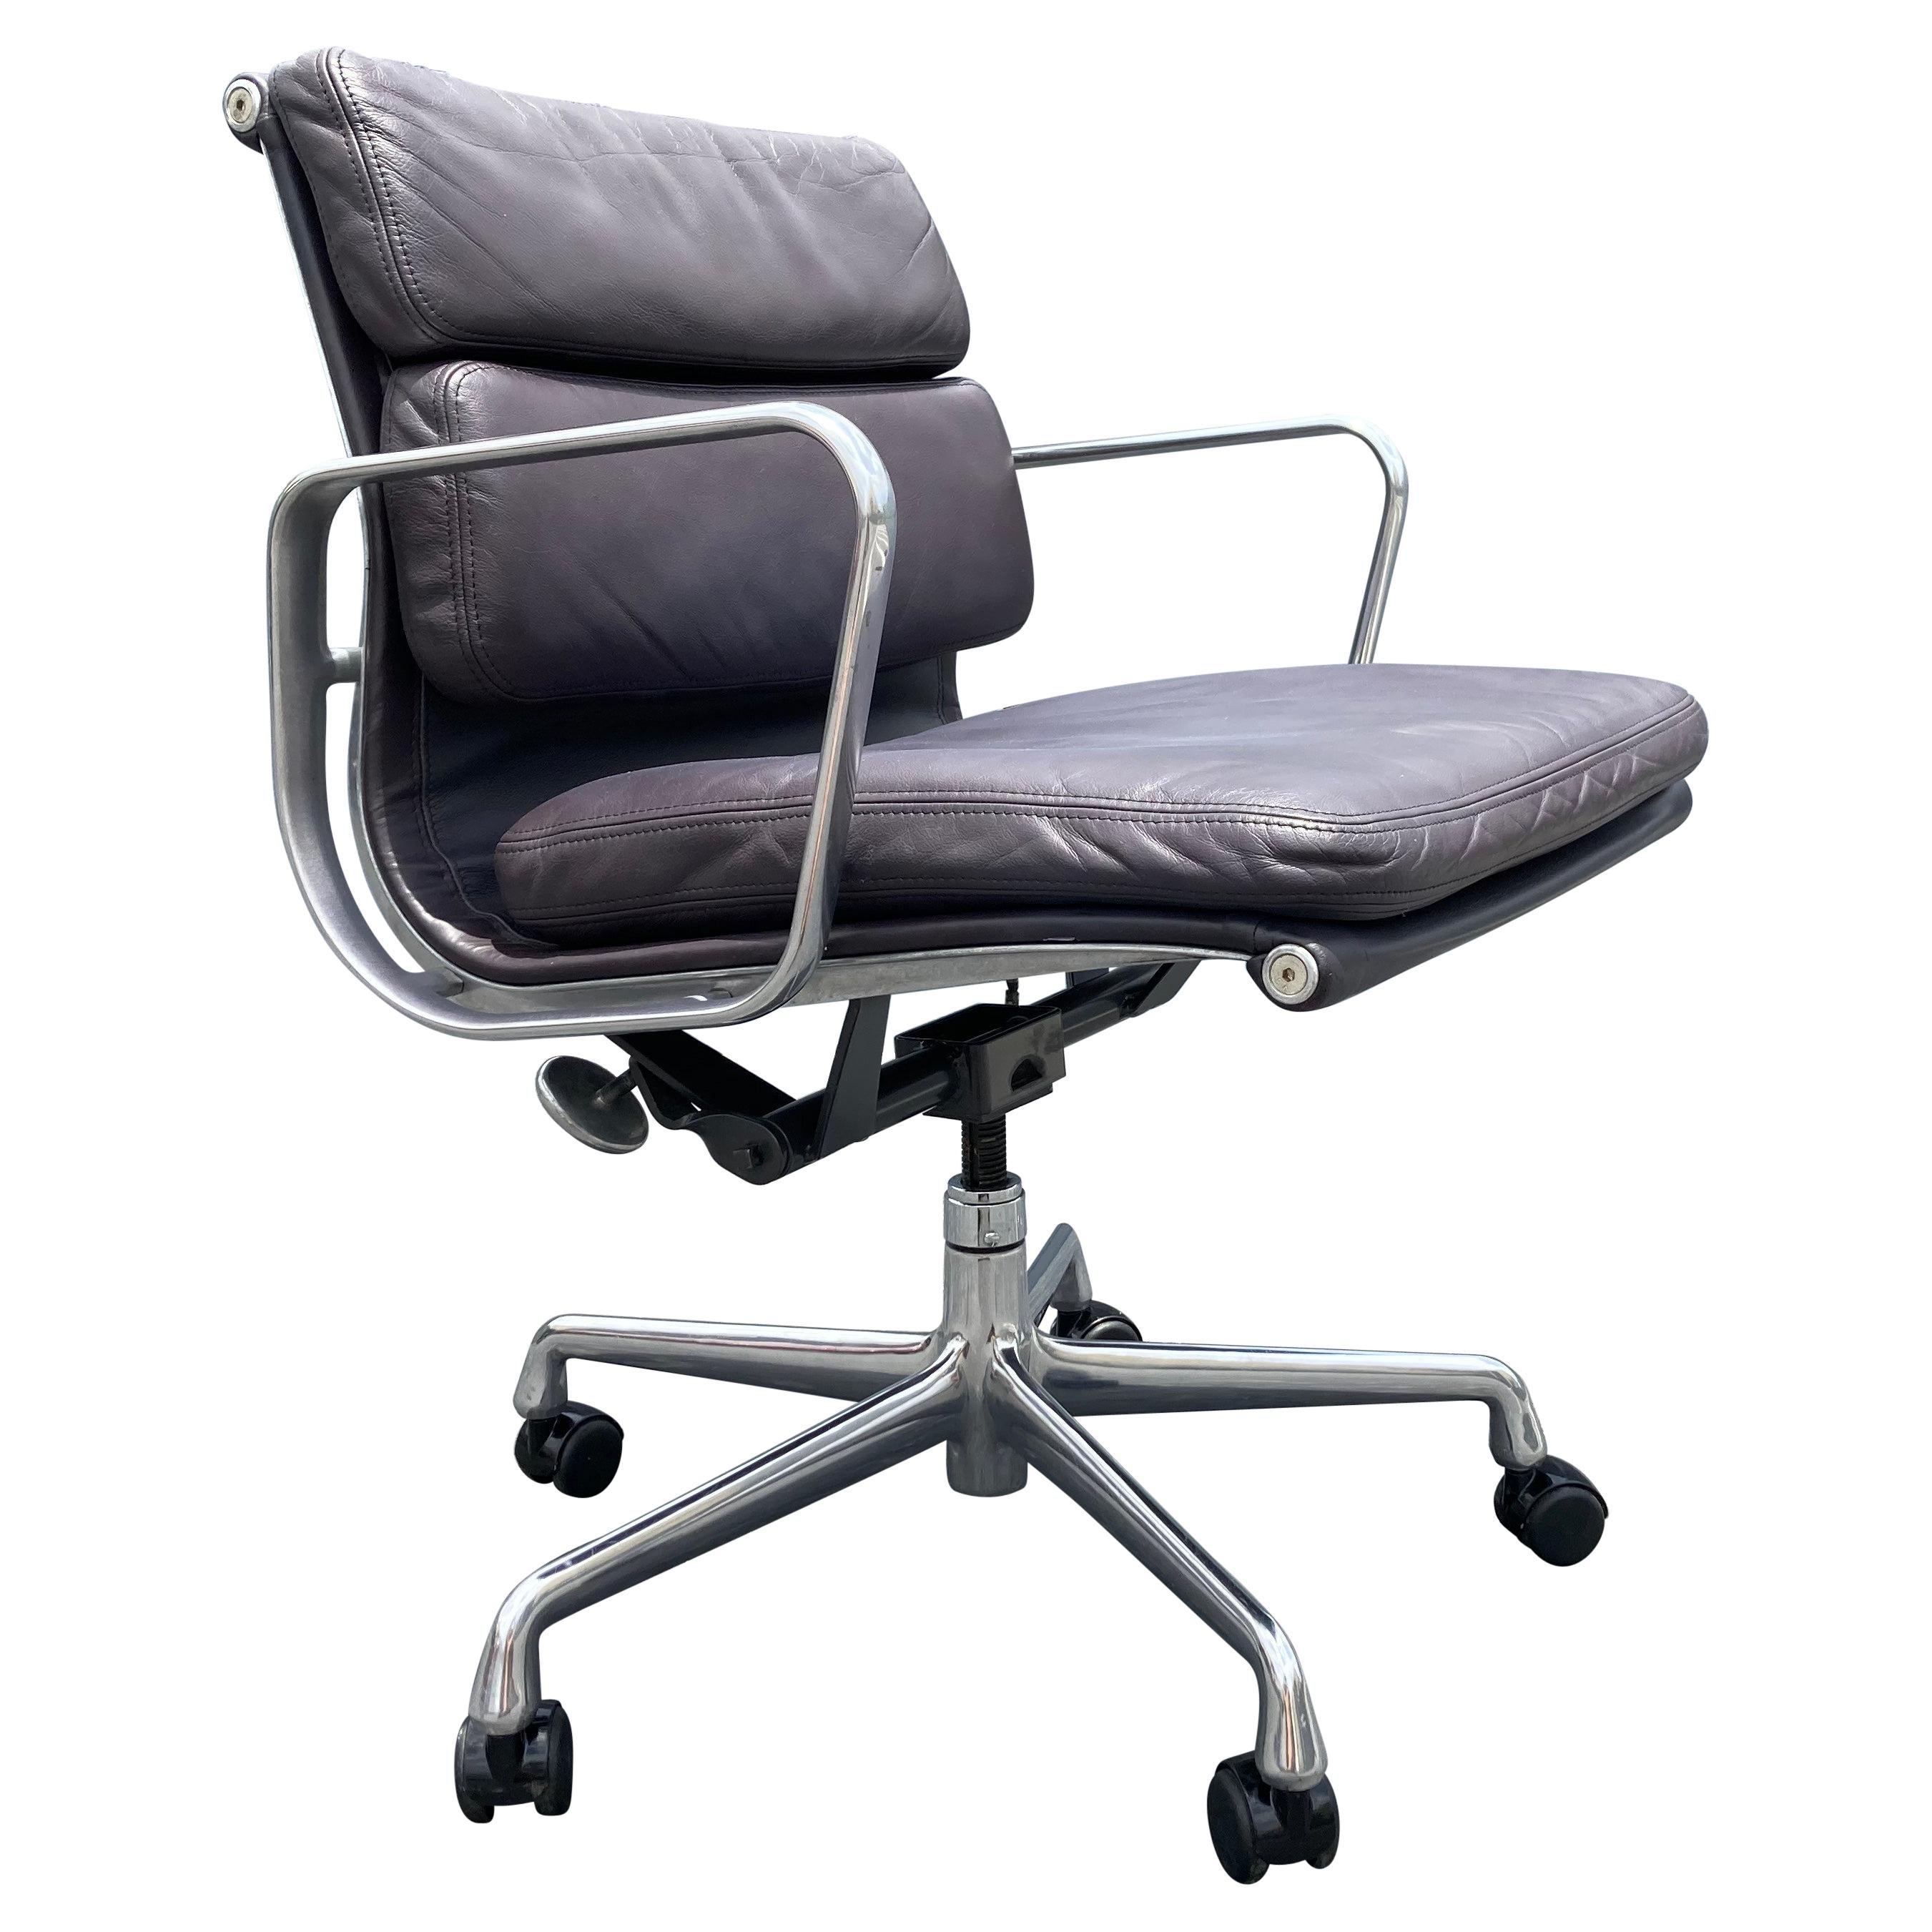 Eames Leather Soft Pad Management Chair for Herman Miller